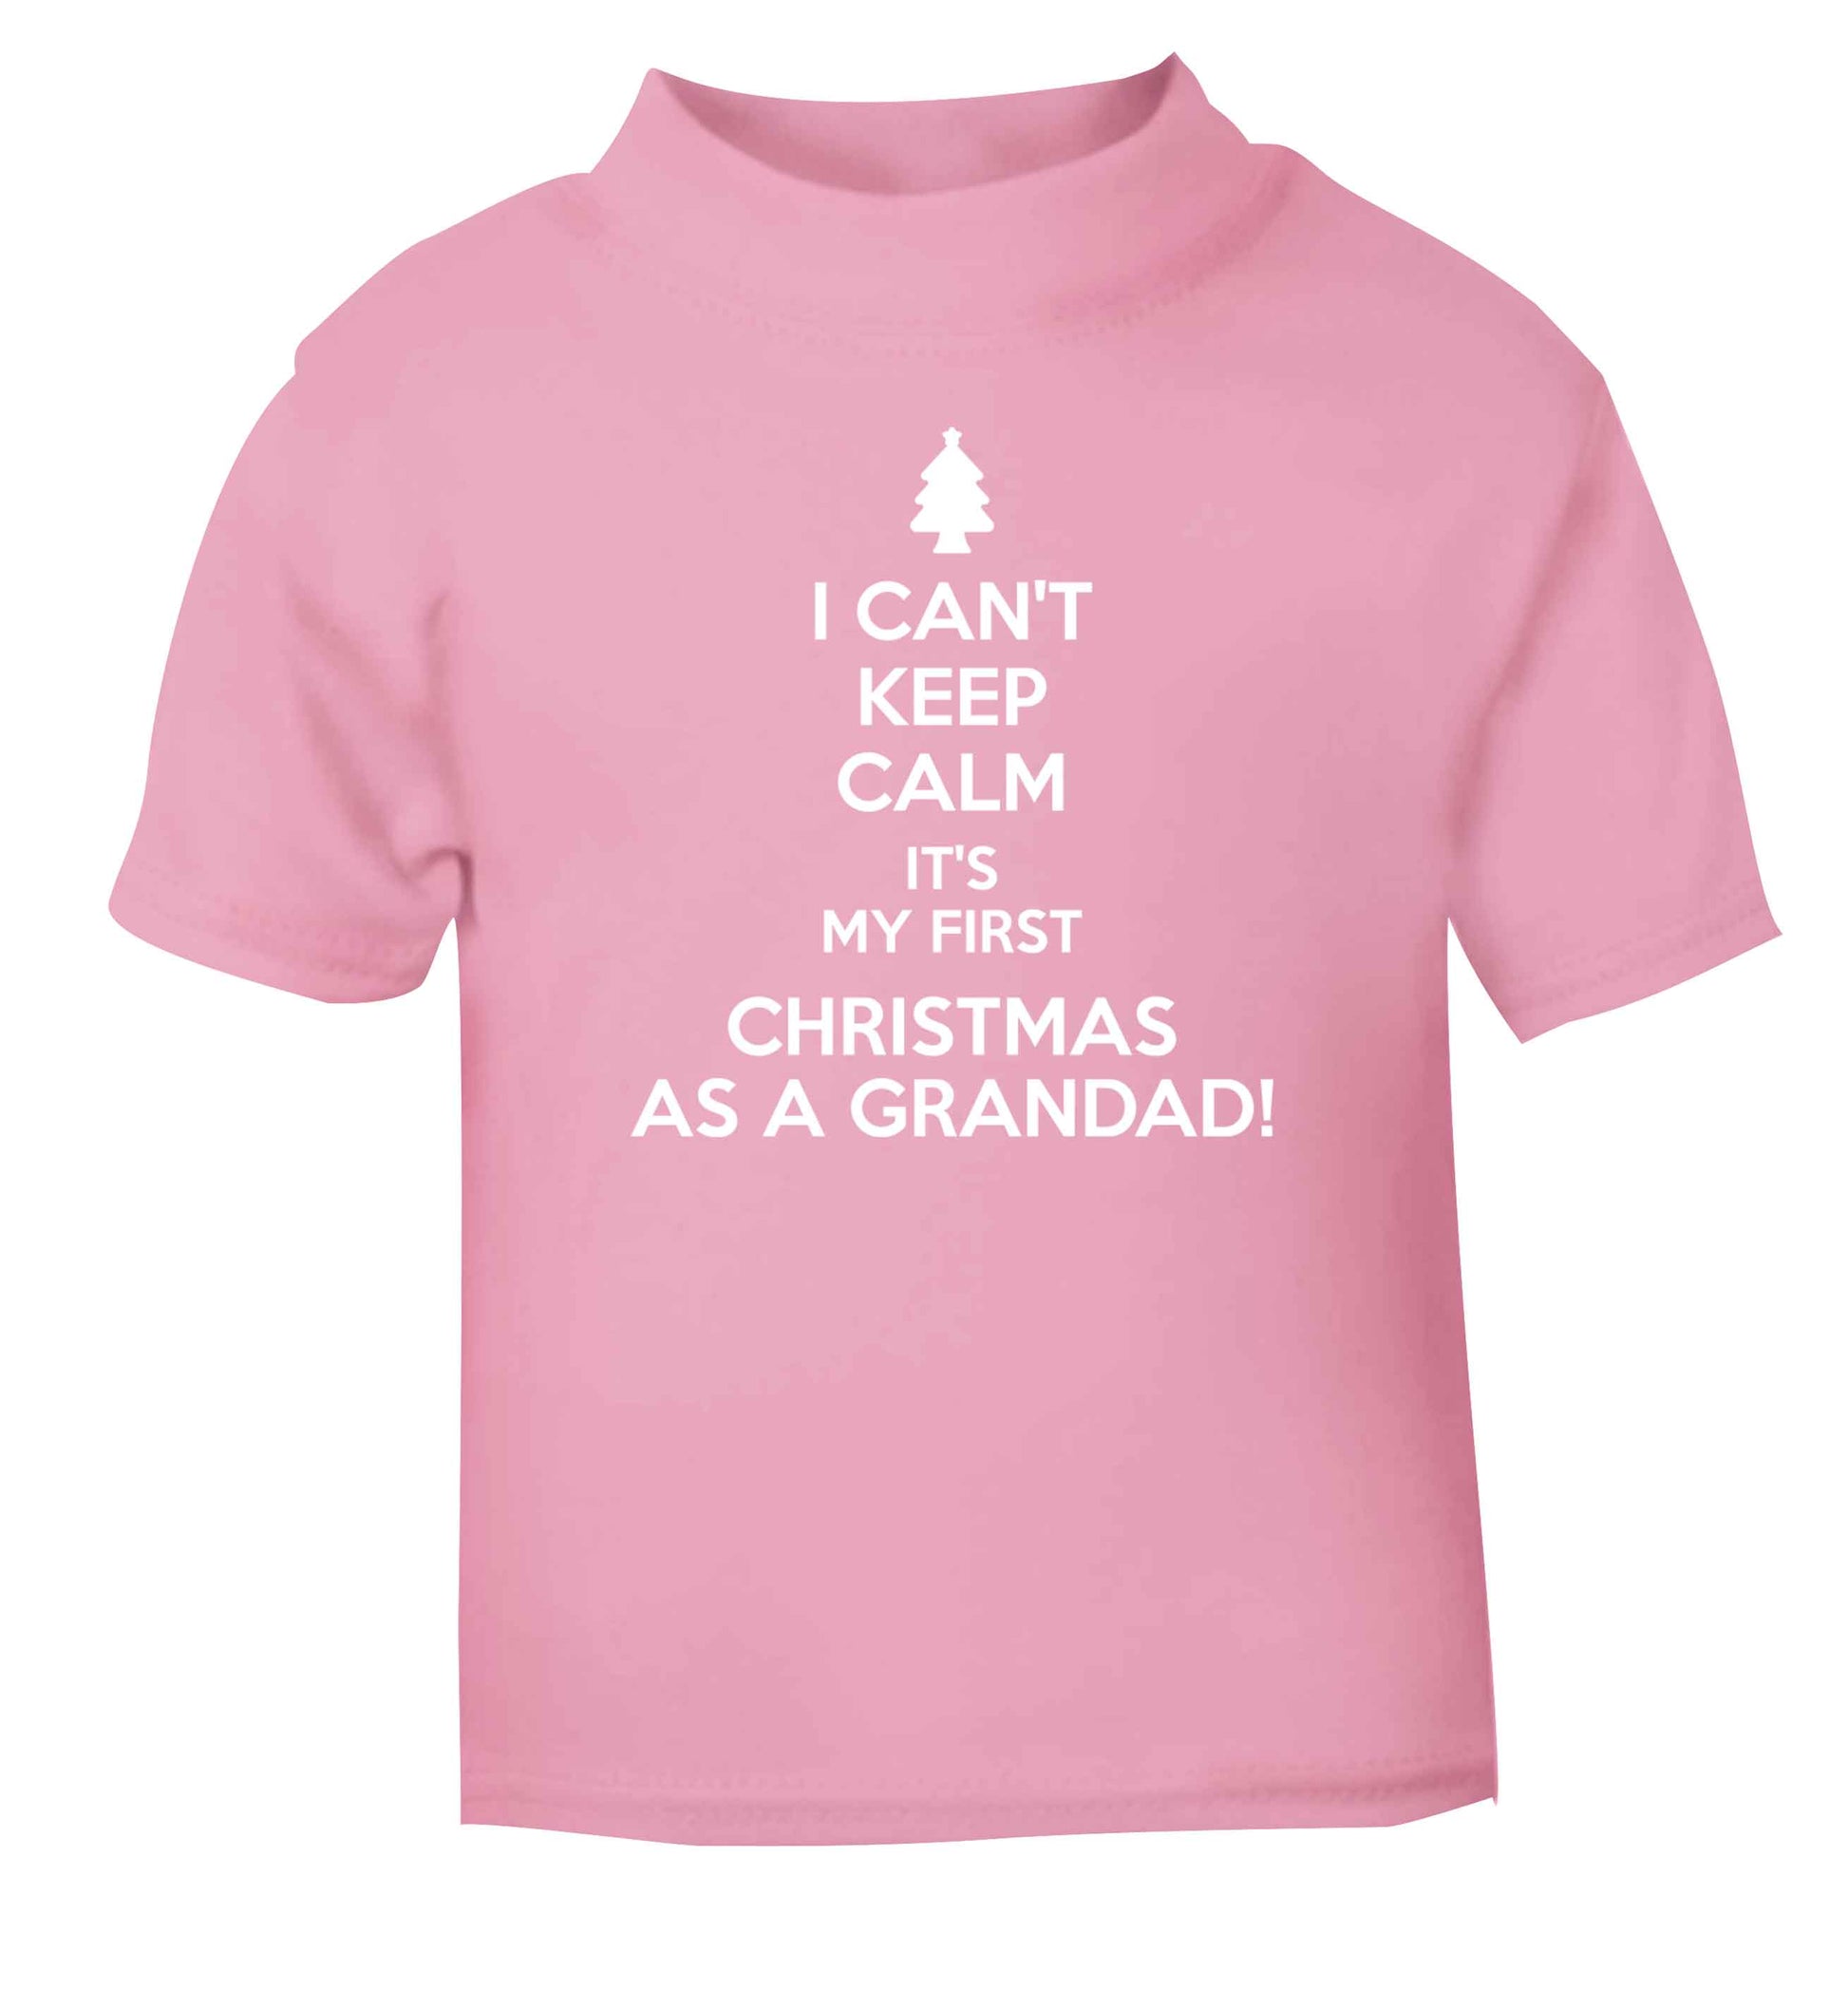 I can't keep calm it's my first Christmas as a grandad! light pink Baby Toddler Tshirt 2 Years